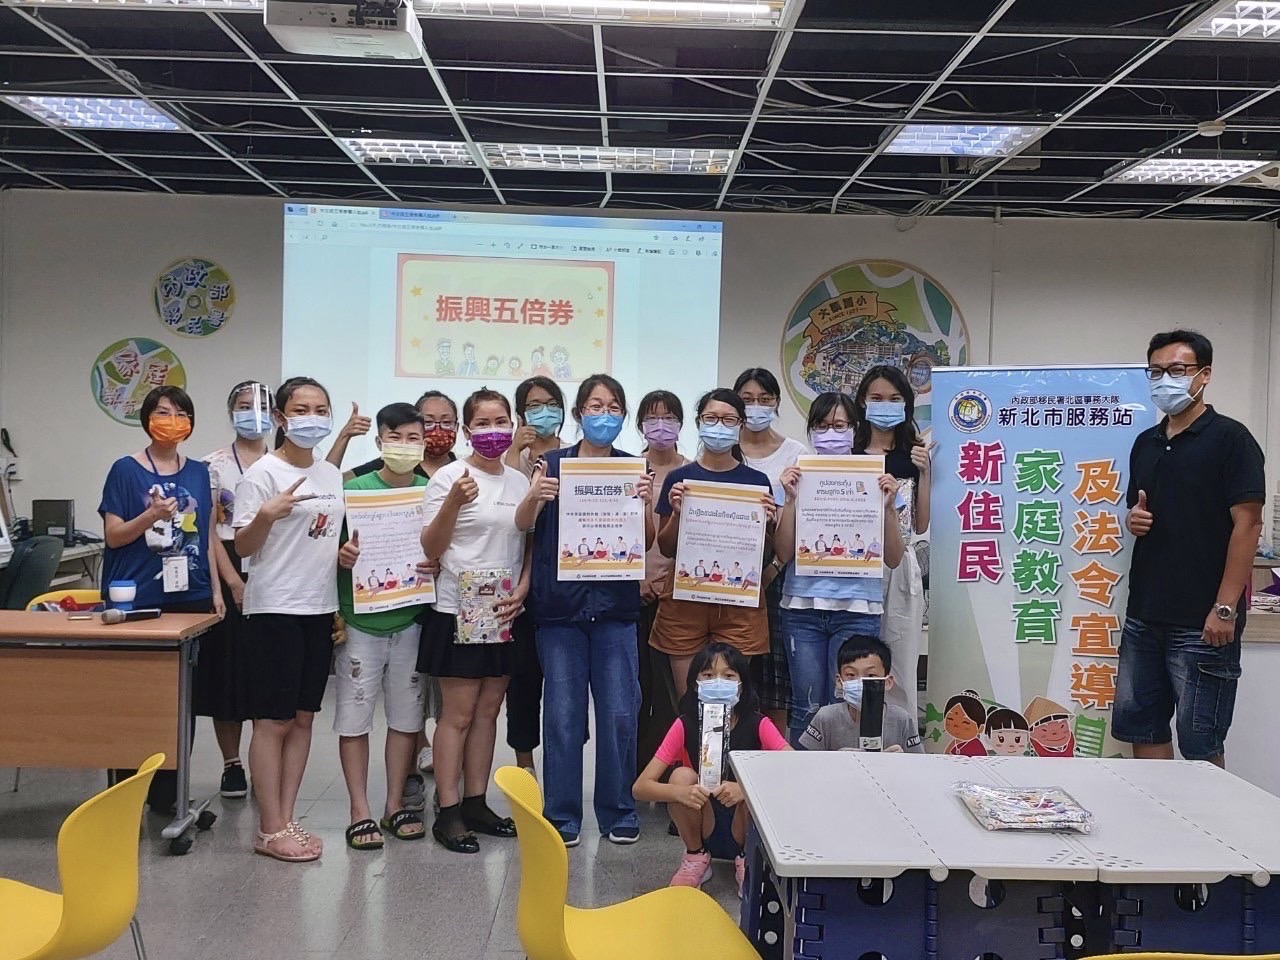 New Taipei City Service Station of the NIA organized family education classes in Daguan Elementary School and used picture cards in different languages. (Photo/Provided by New Taipei City Service Station)